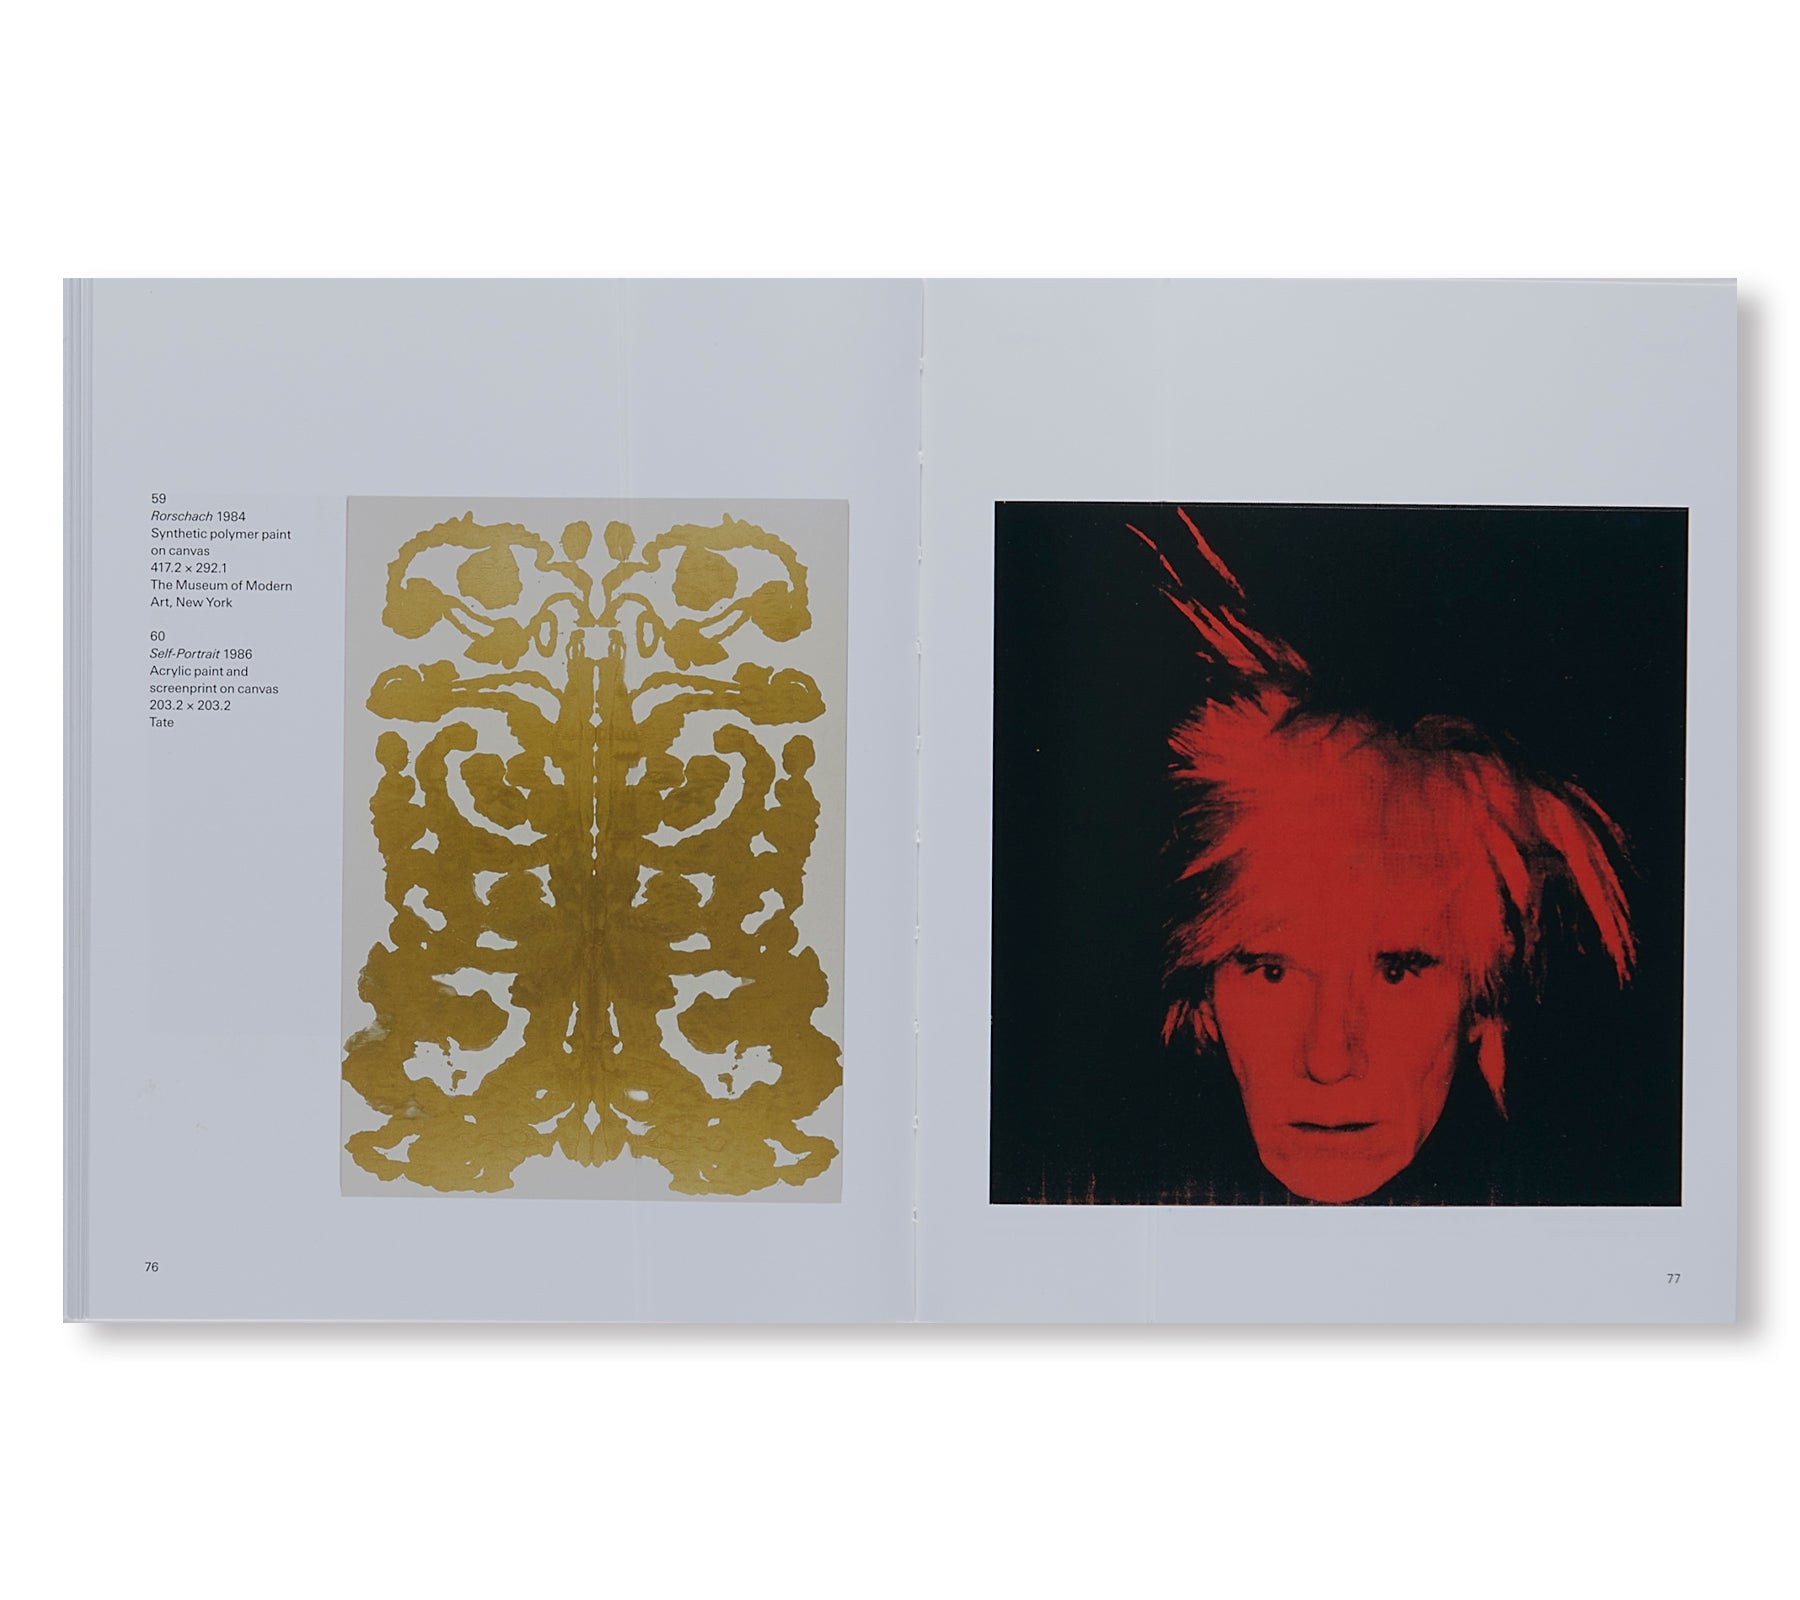 TATE INTRODUCTIONS: ANDY WARHOL by Andy Warhol